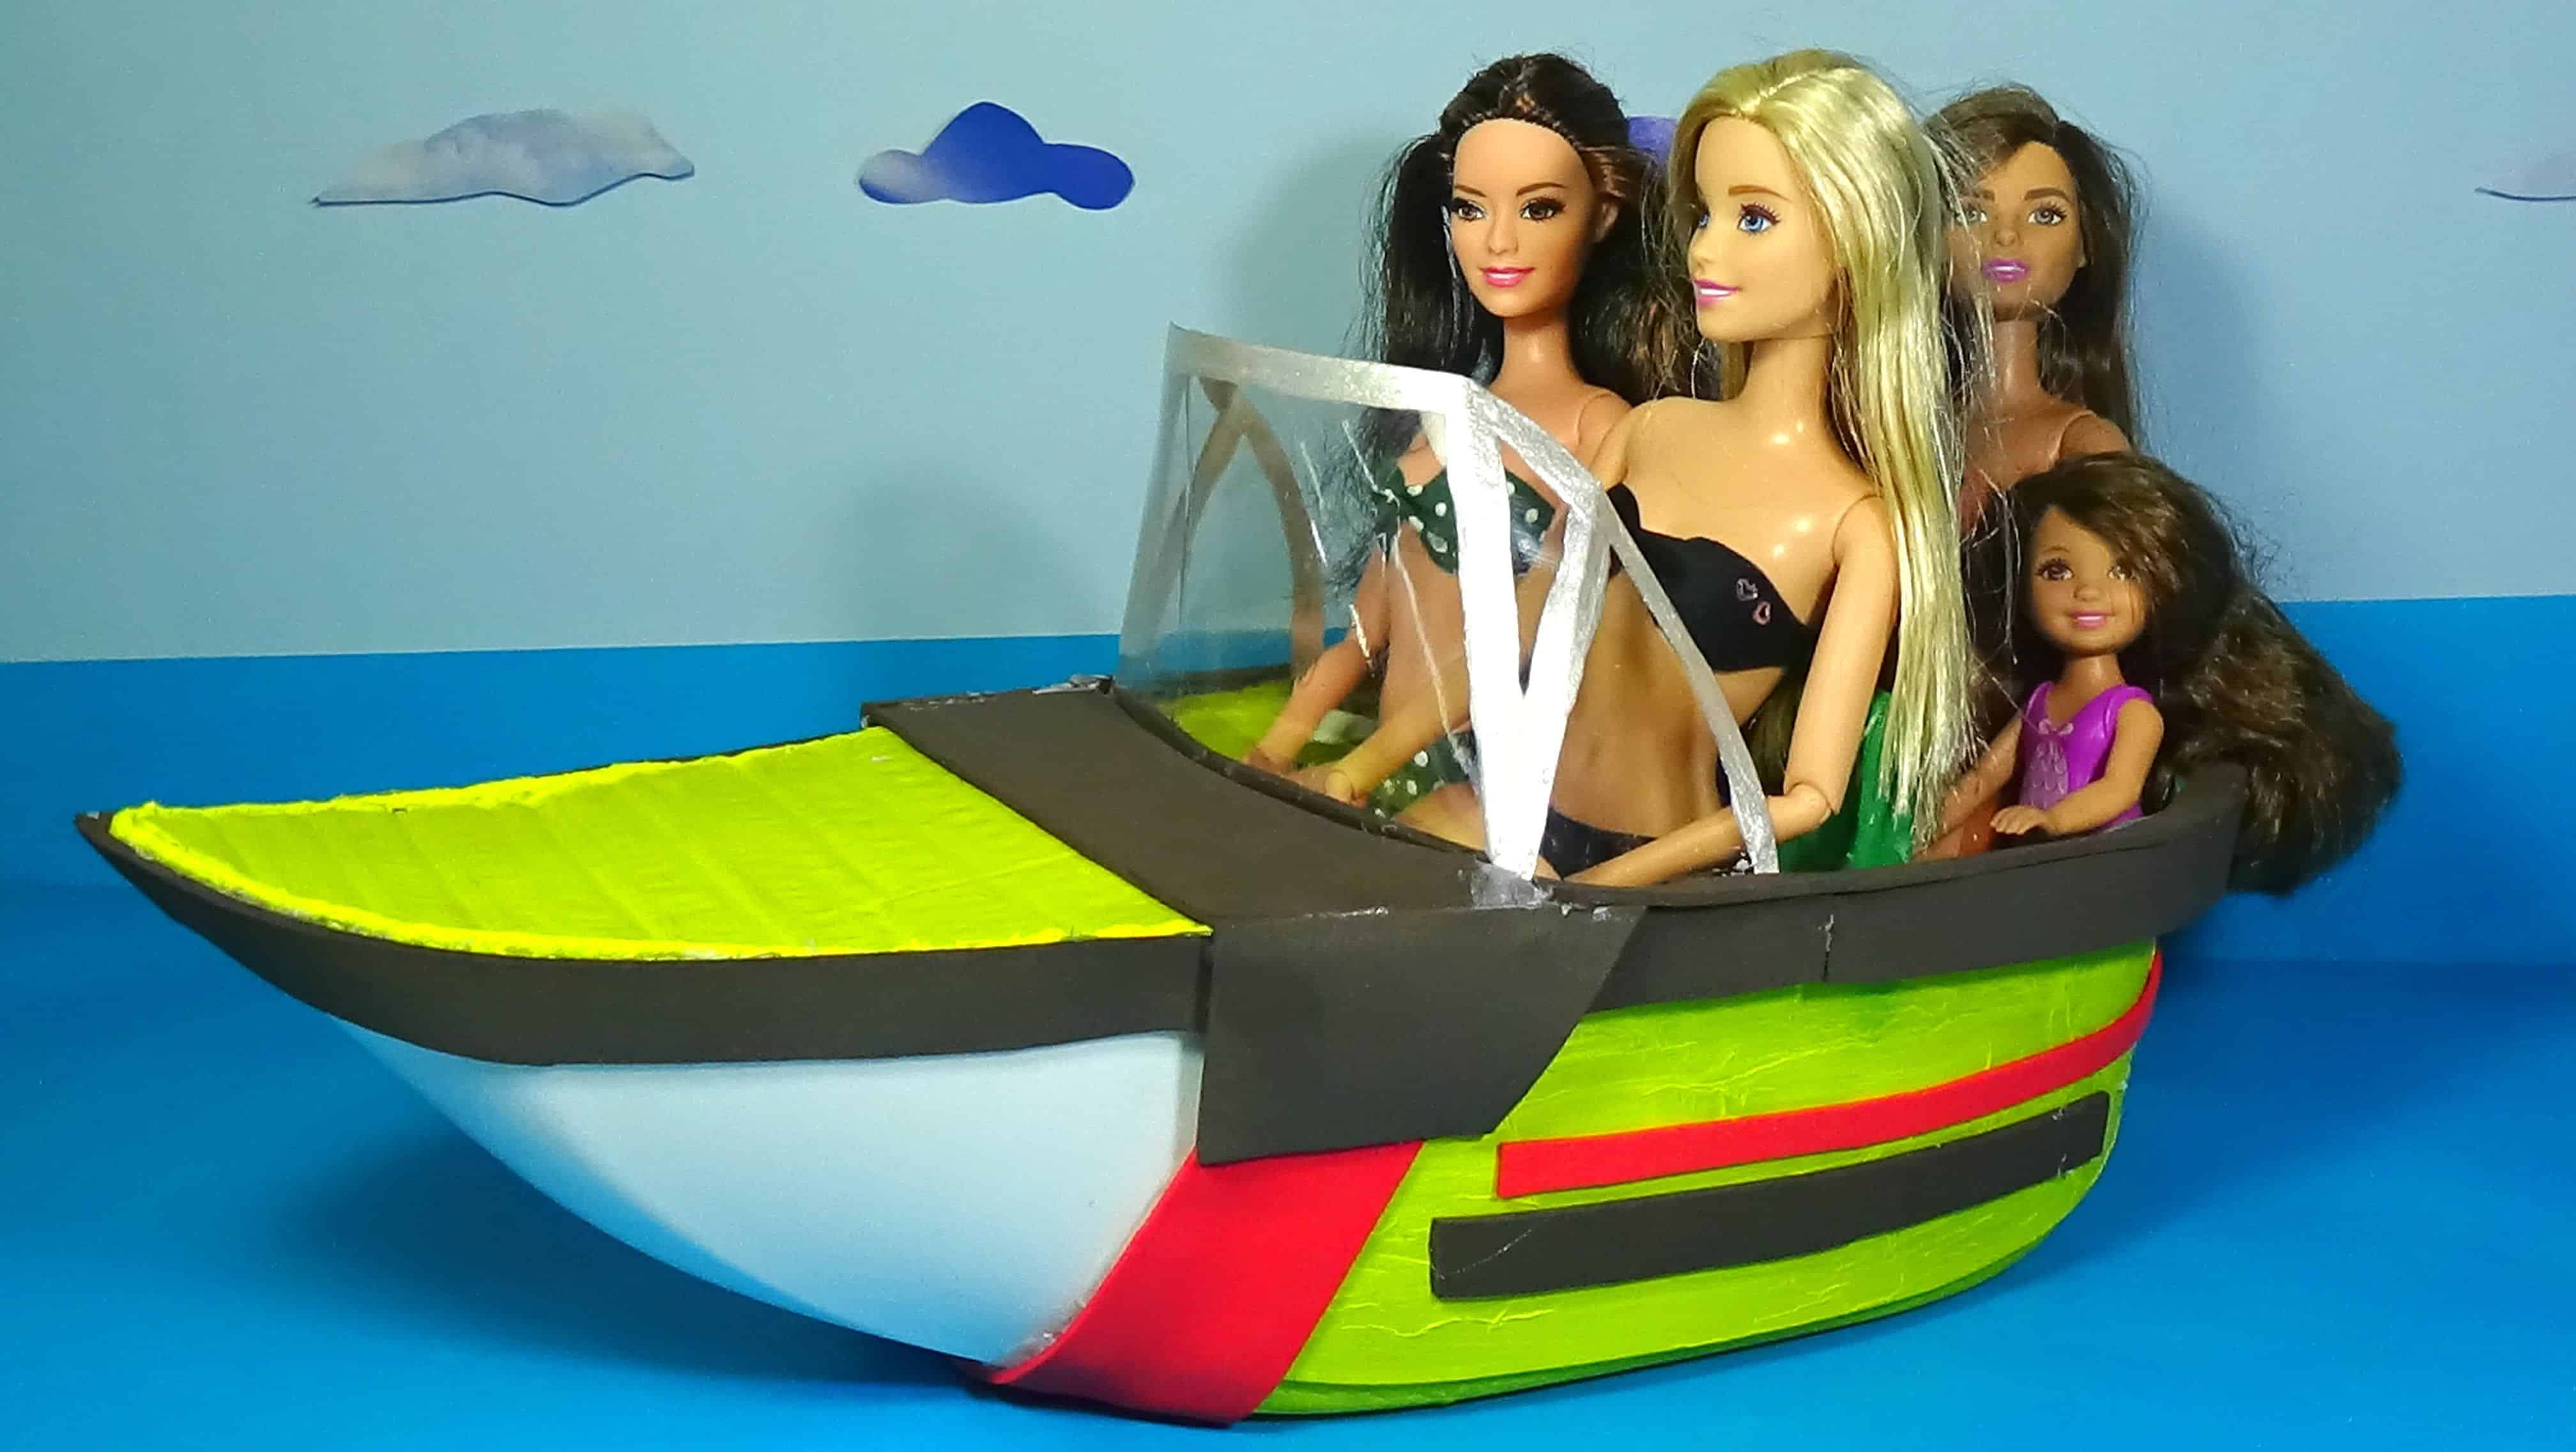 Barie doll speed boat